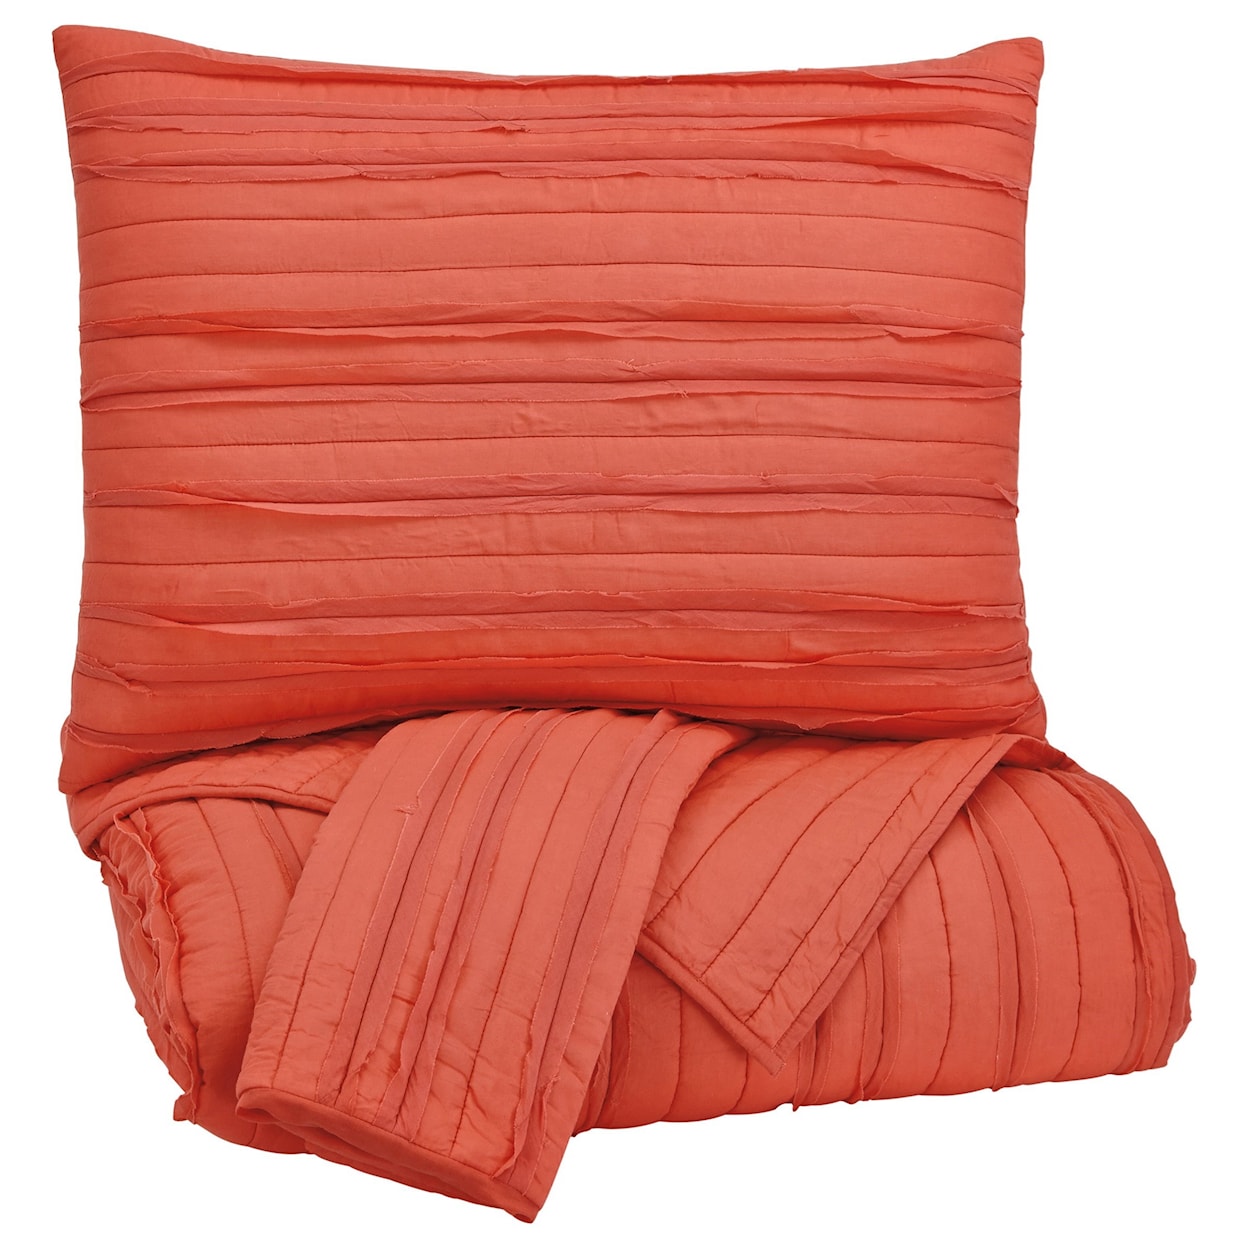 Signature Design by Ashley Furniture Bedding Sets Queen Solsta Coral Coverlet Set